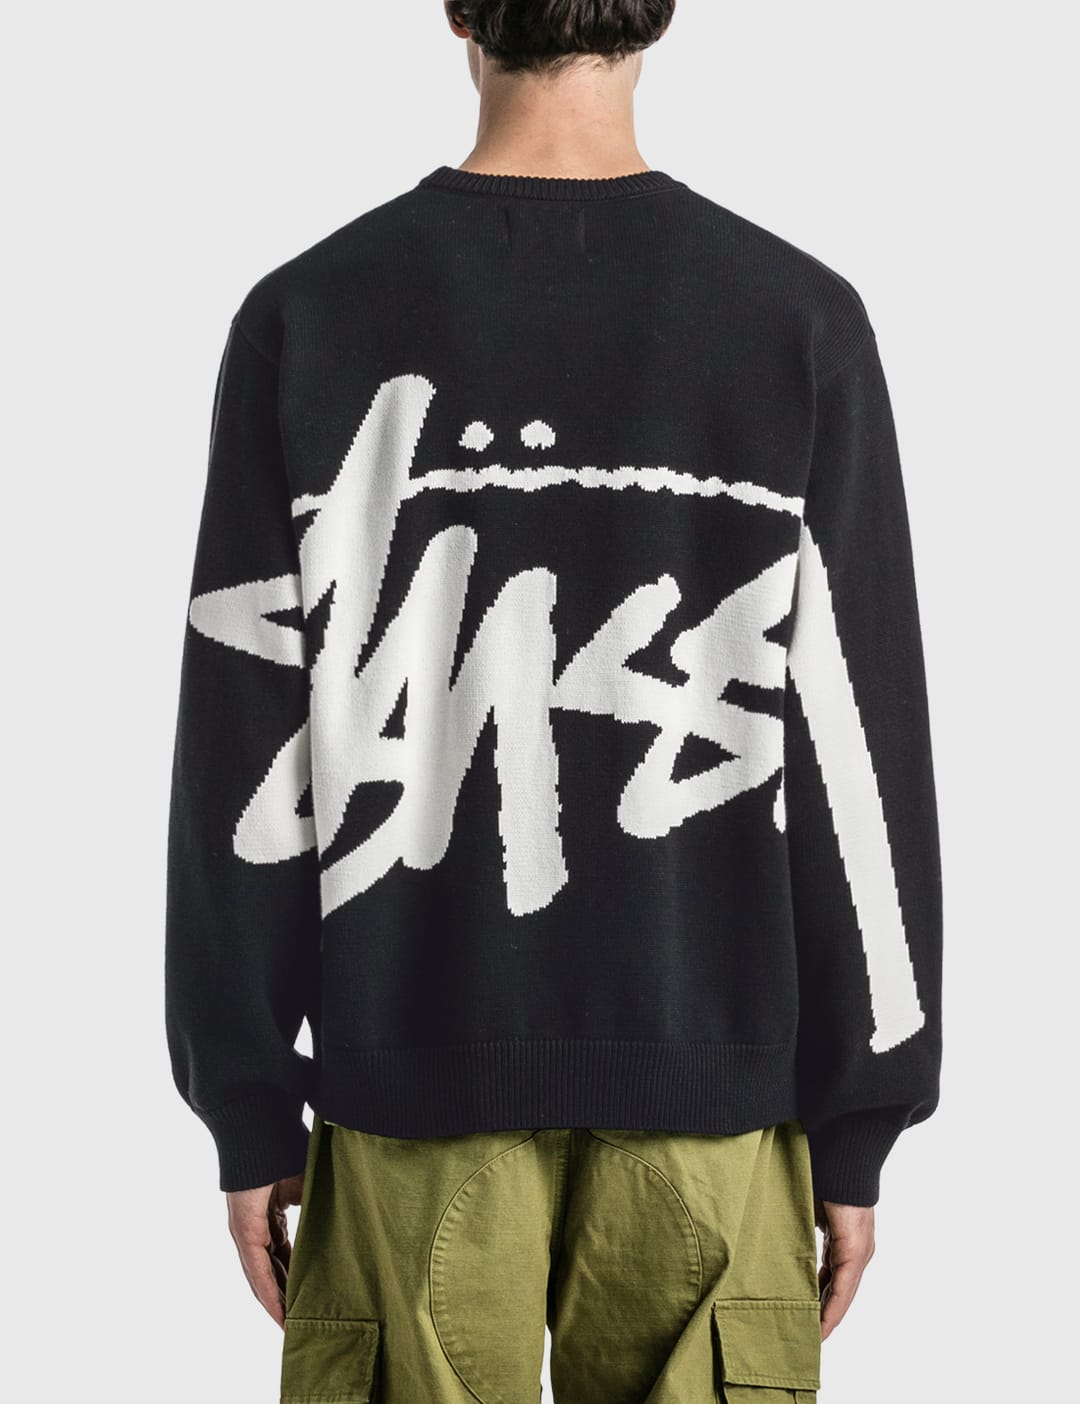 Stüssy - Stock Sweater | HBX - Globally Curated Fashion and 